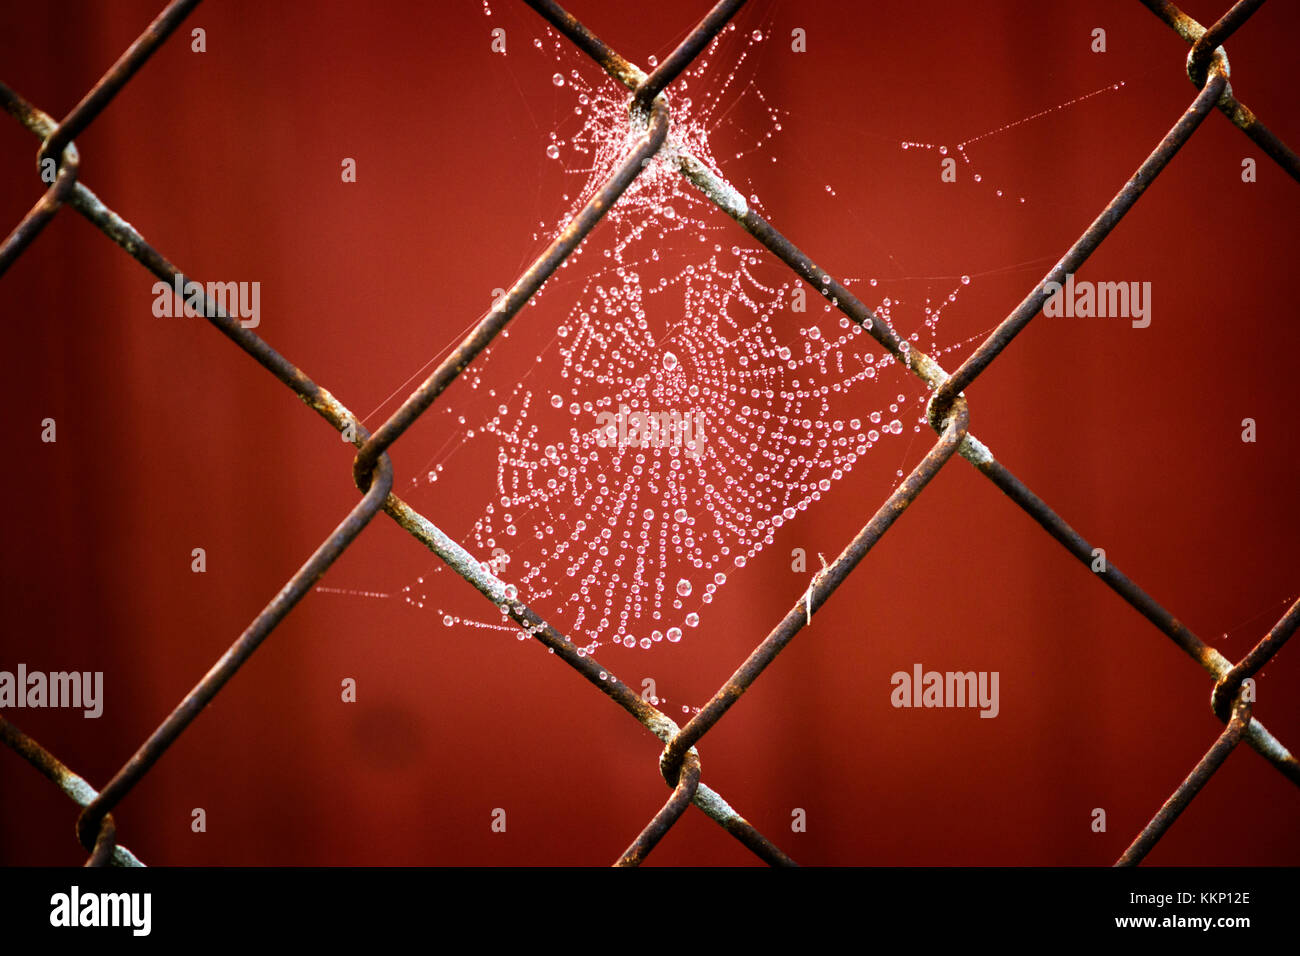 Spider web on a fence revealed in morning dew. Stock Photo